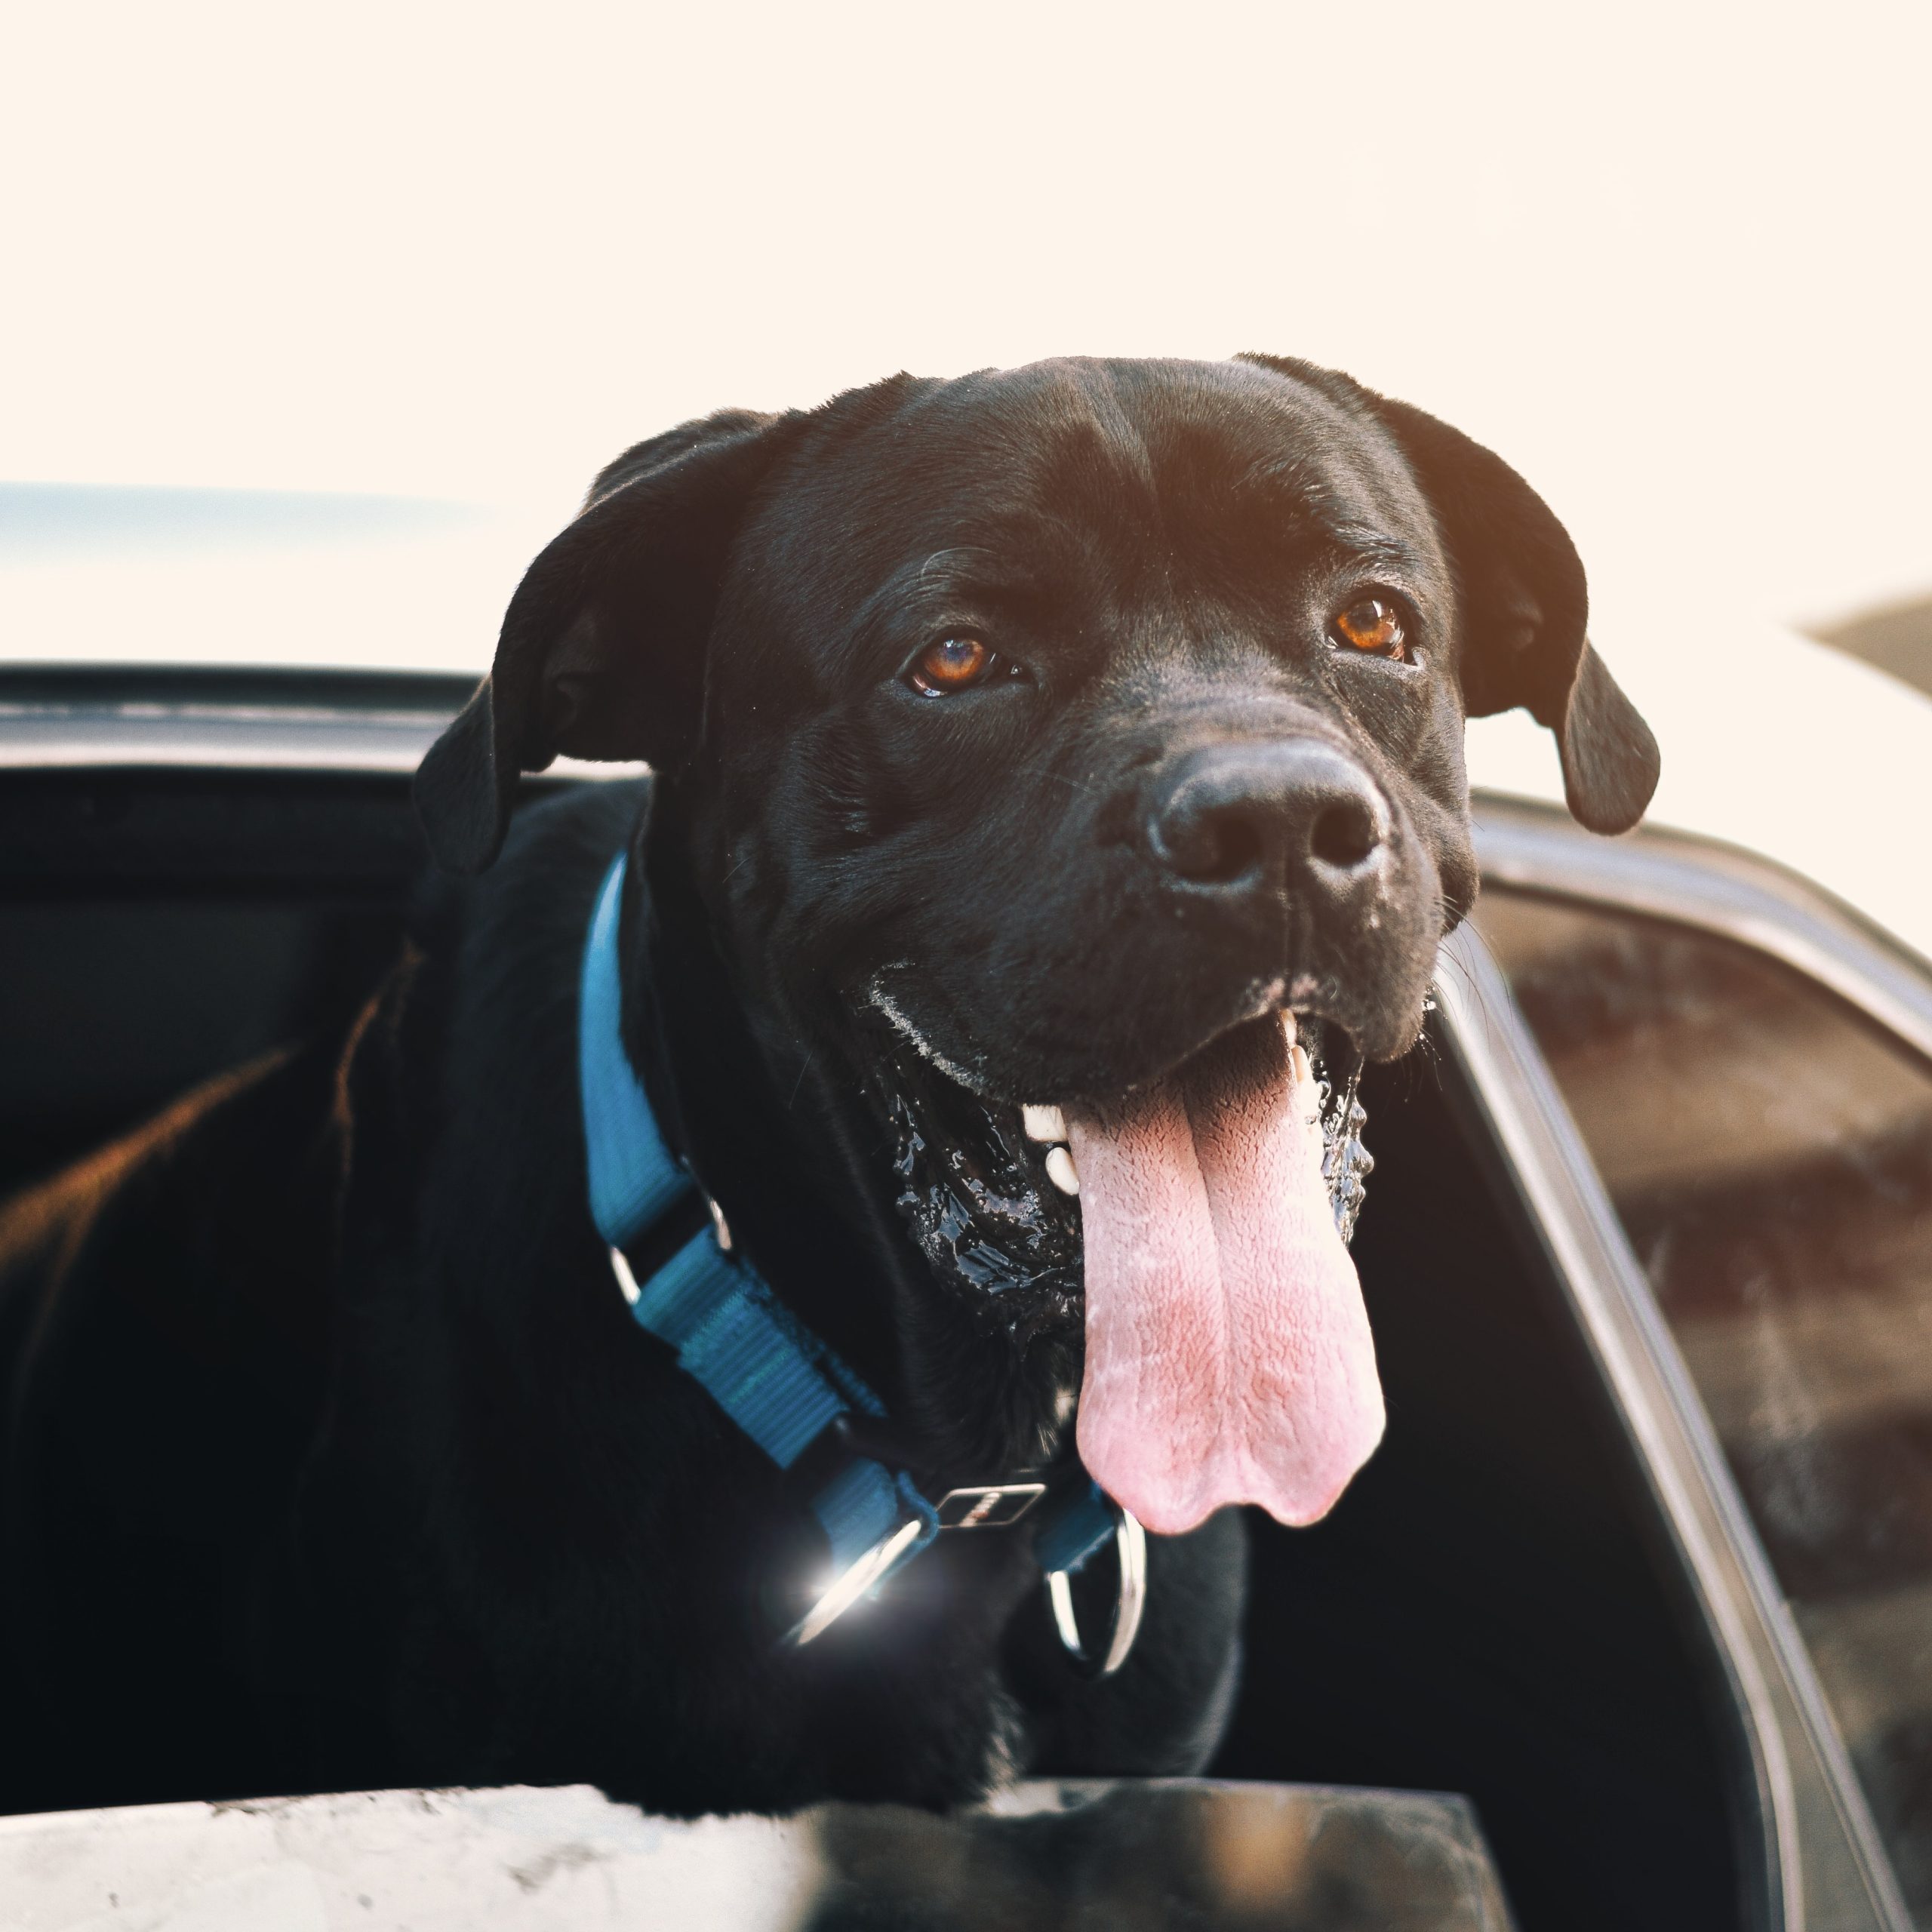 How to Prevent Car Sickness in Dogs